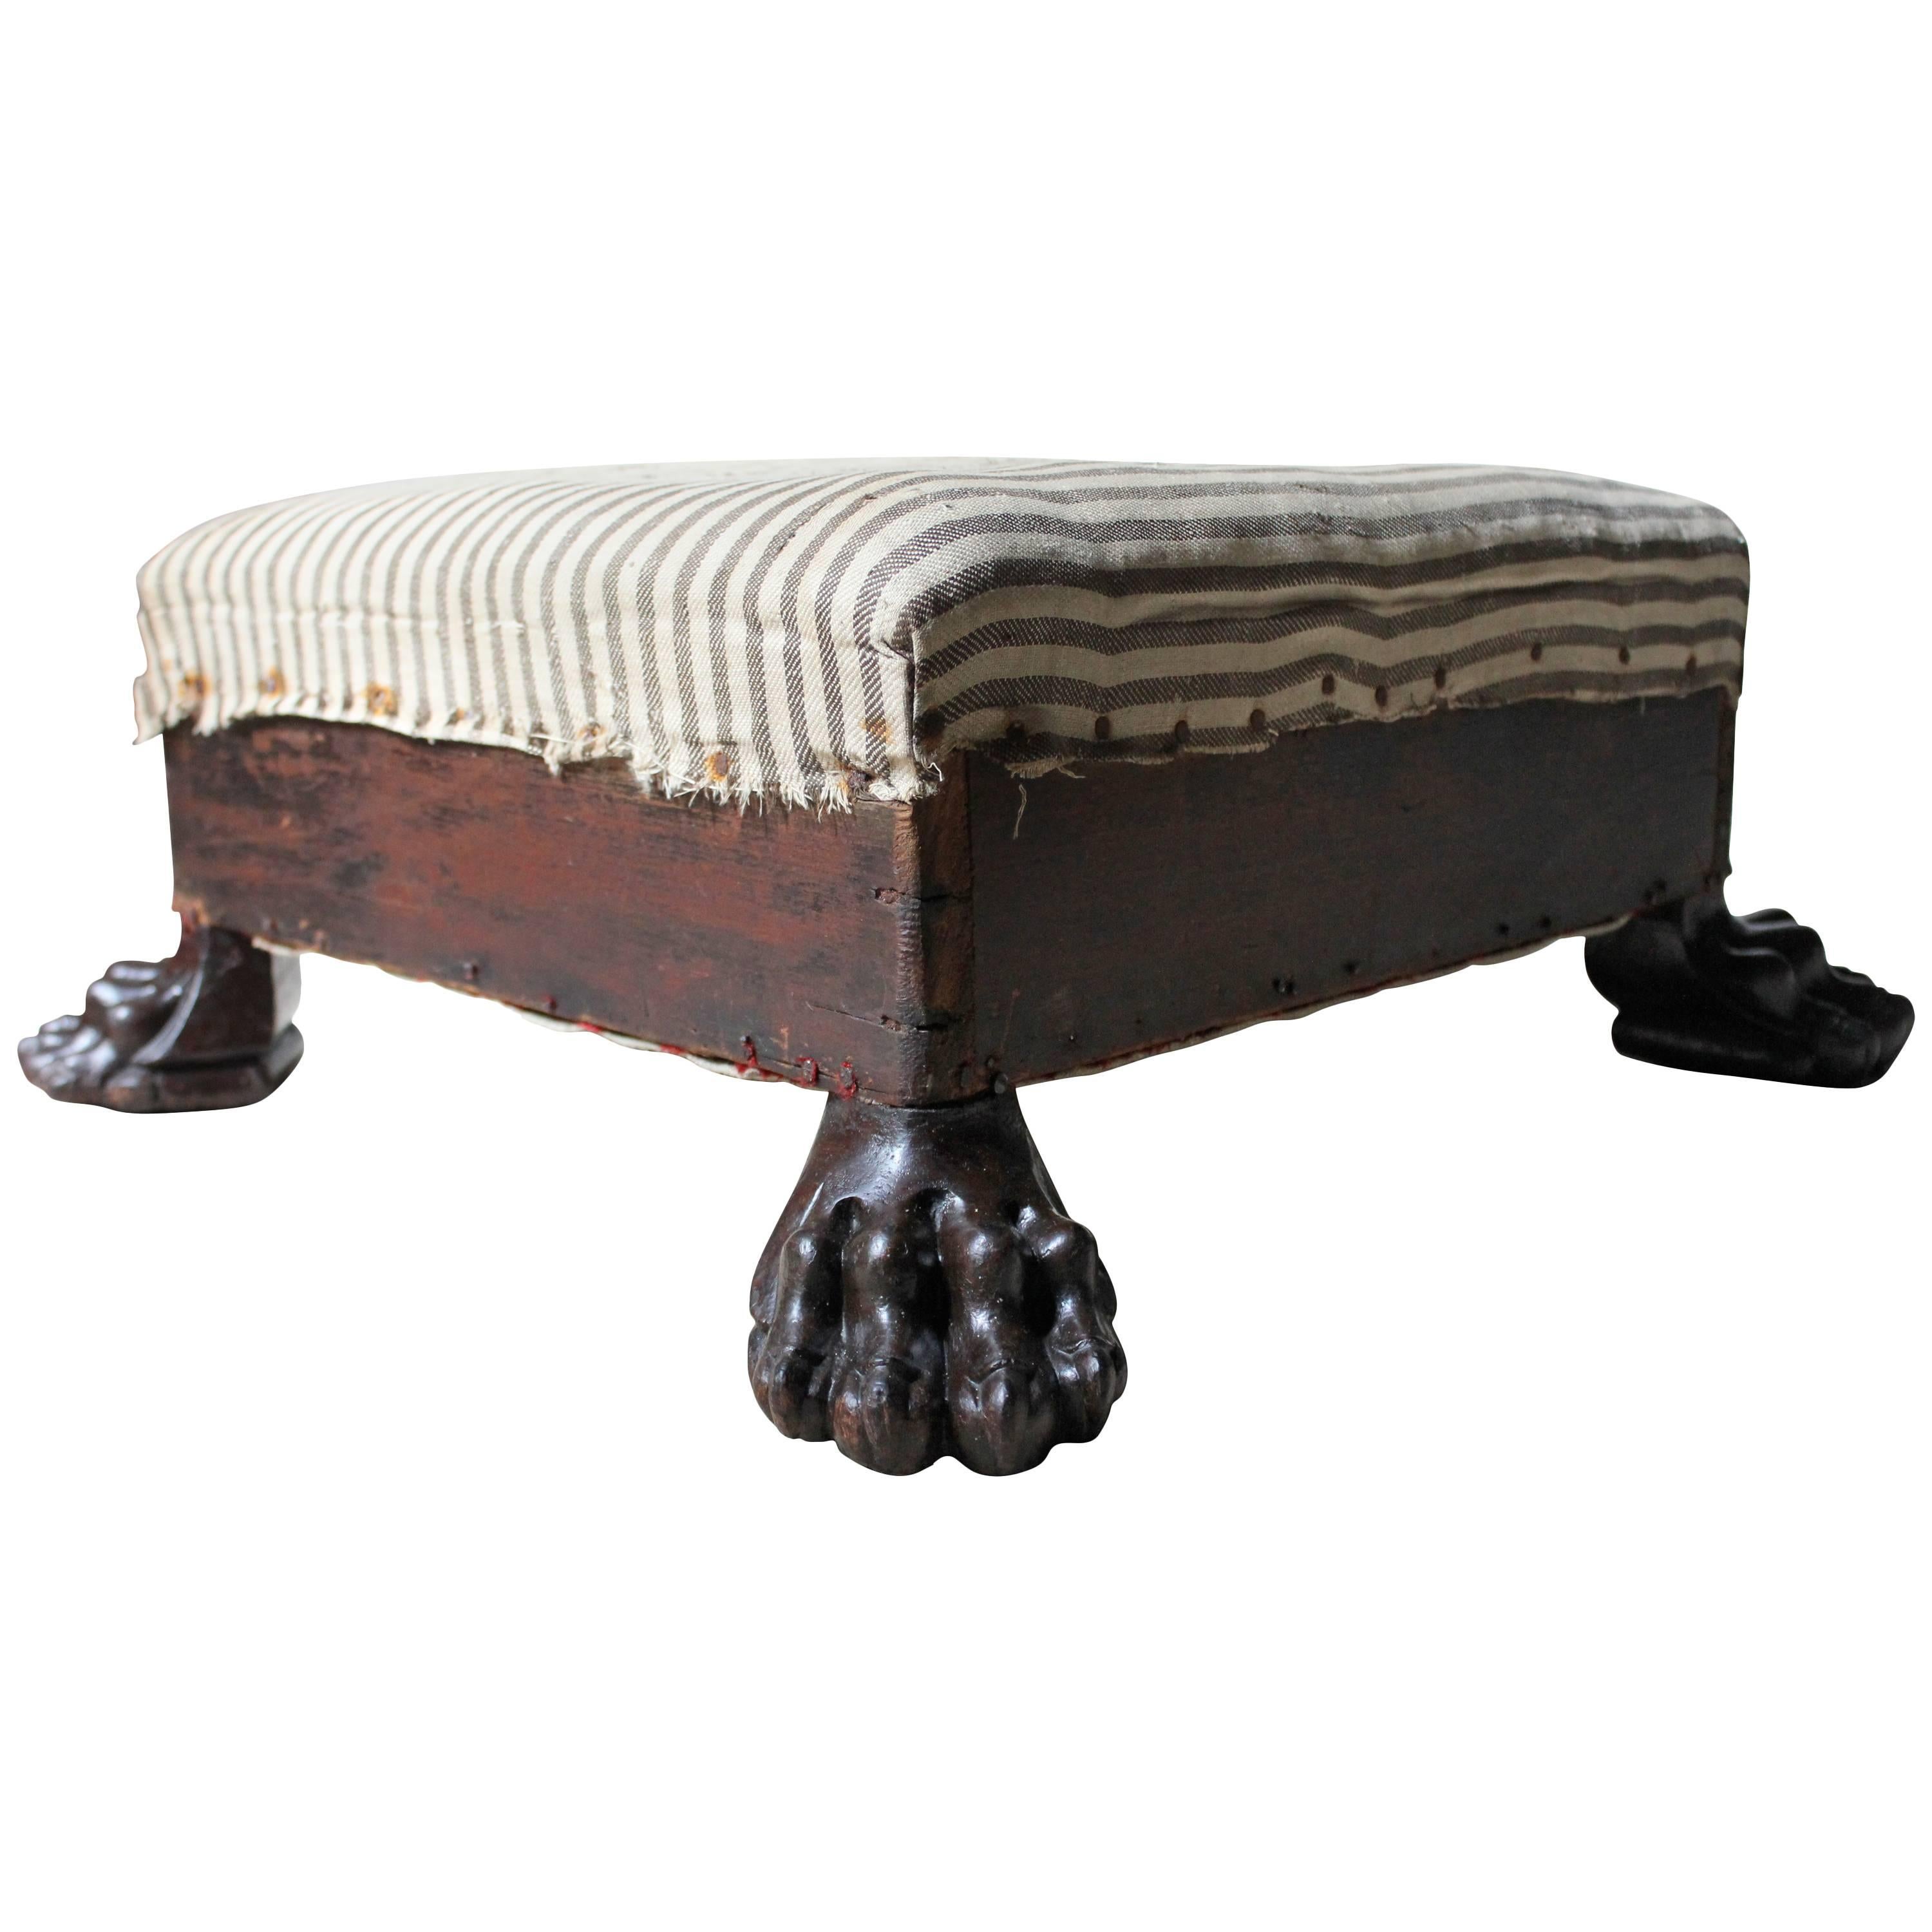 Magnificent Regency Period Mahogany Lions Paw Footed & Ticking Upholstered Stool